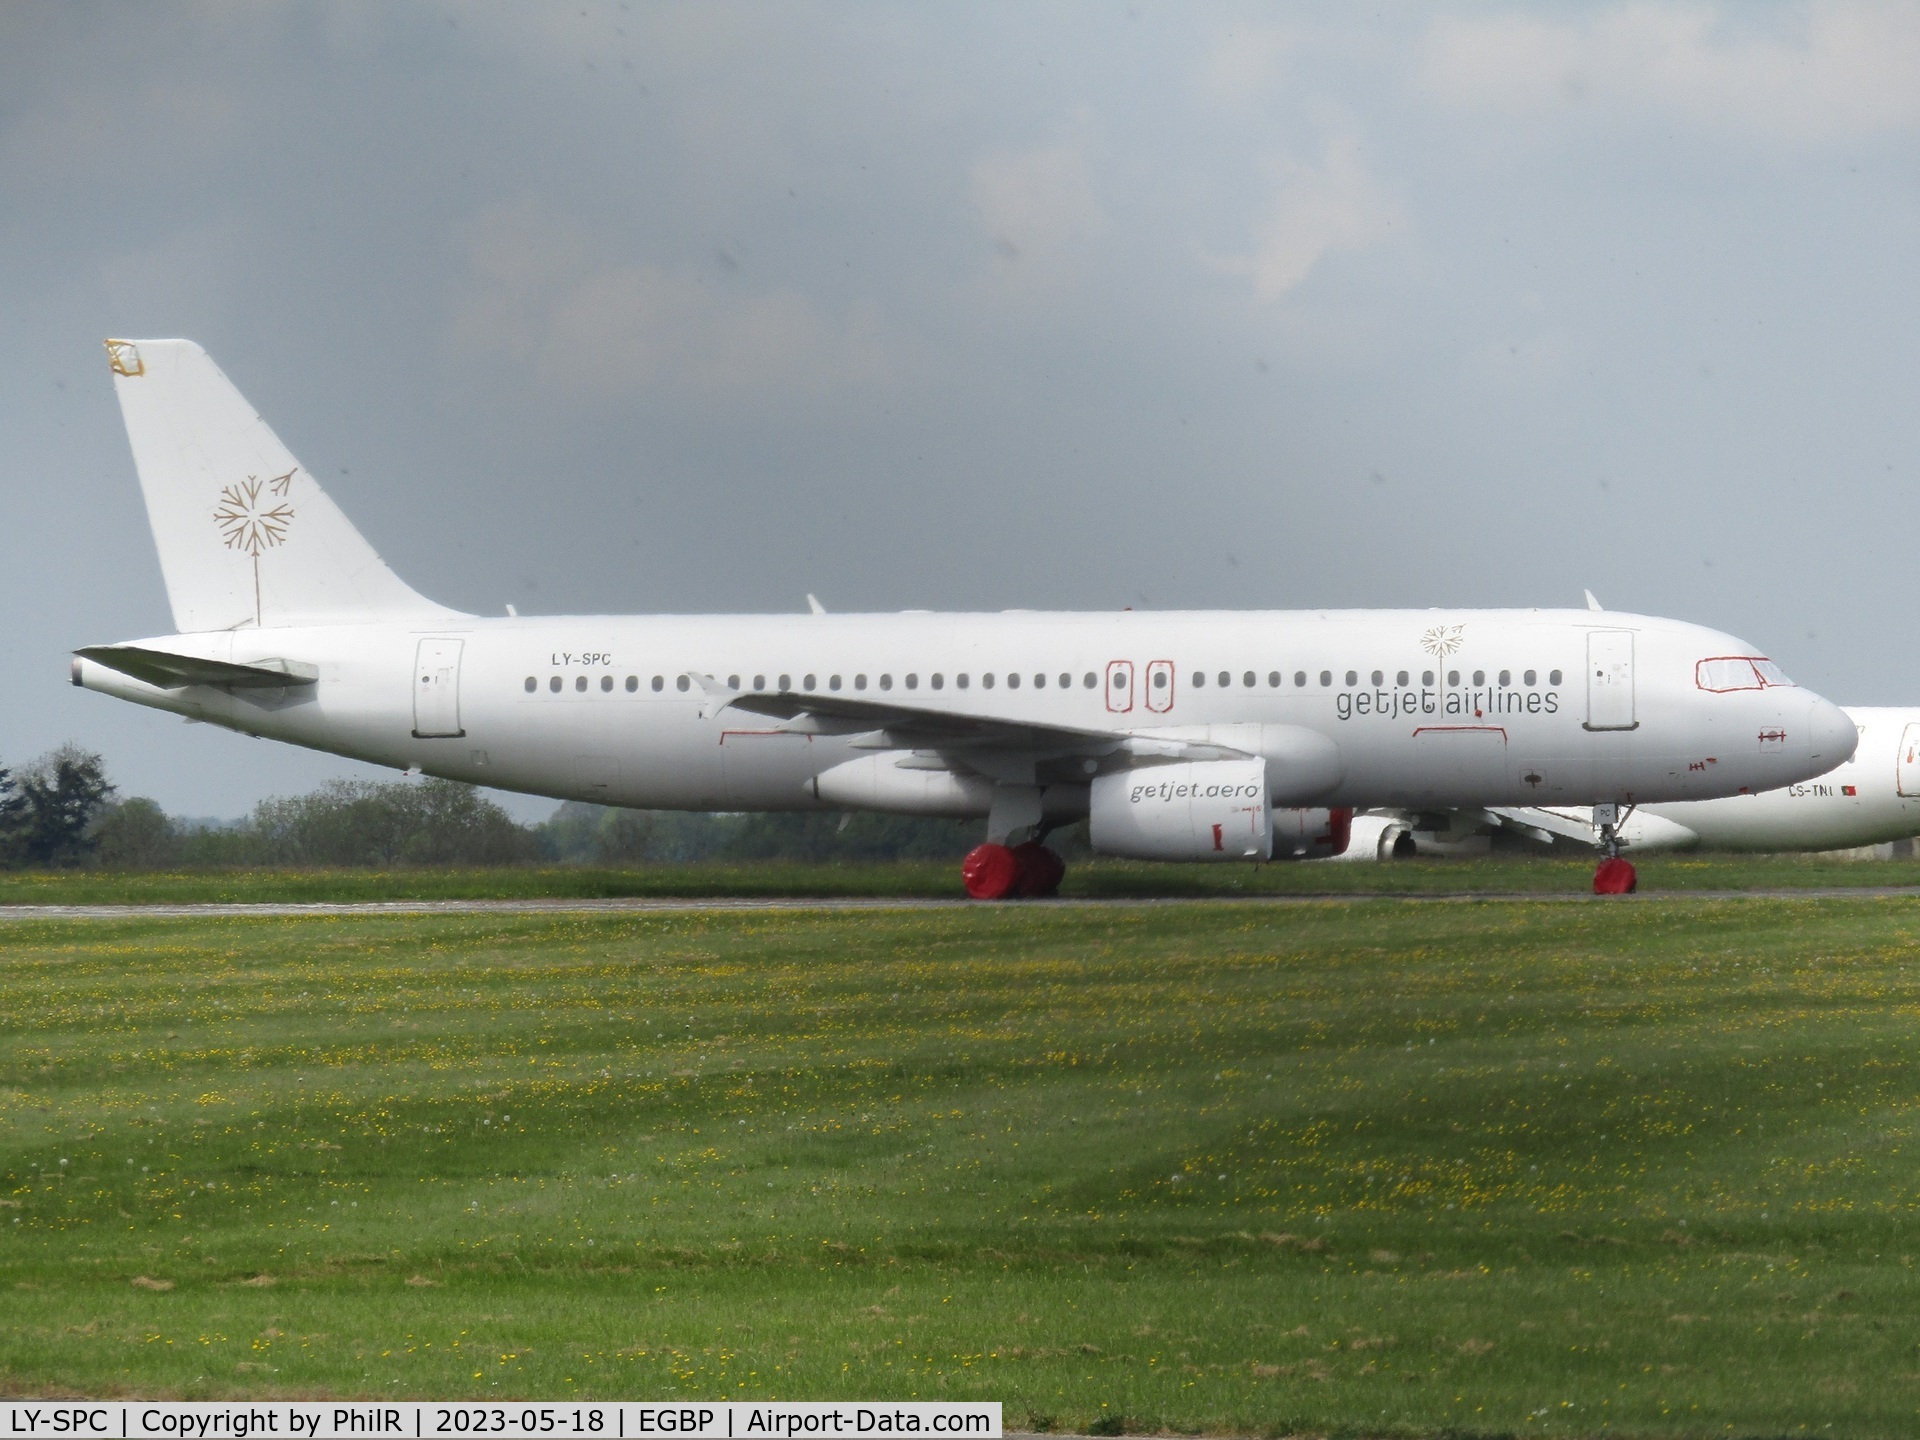 LY-SPC, 1994 Airbus A320-231 C/N 415, LY-SPC 1994 Airbus A320-200 GetJet Kemble